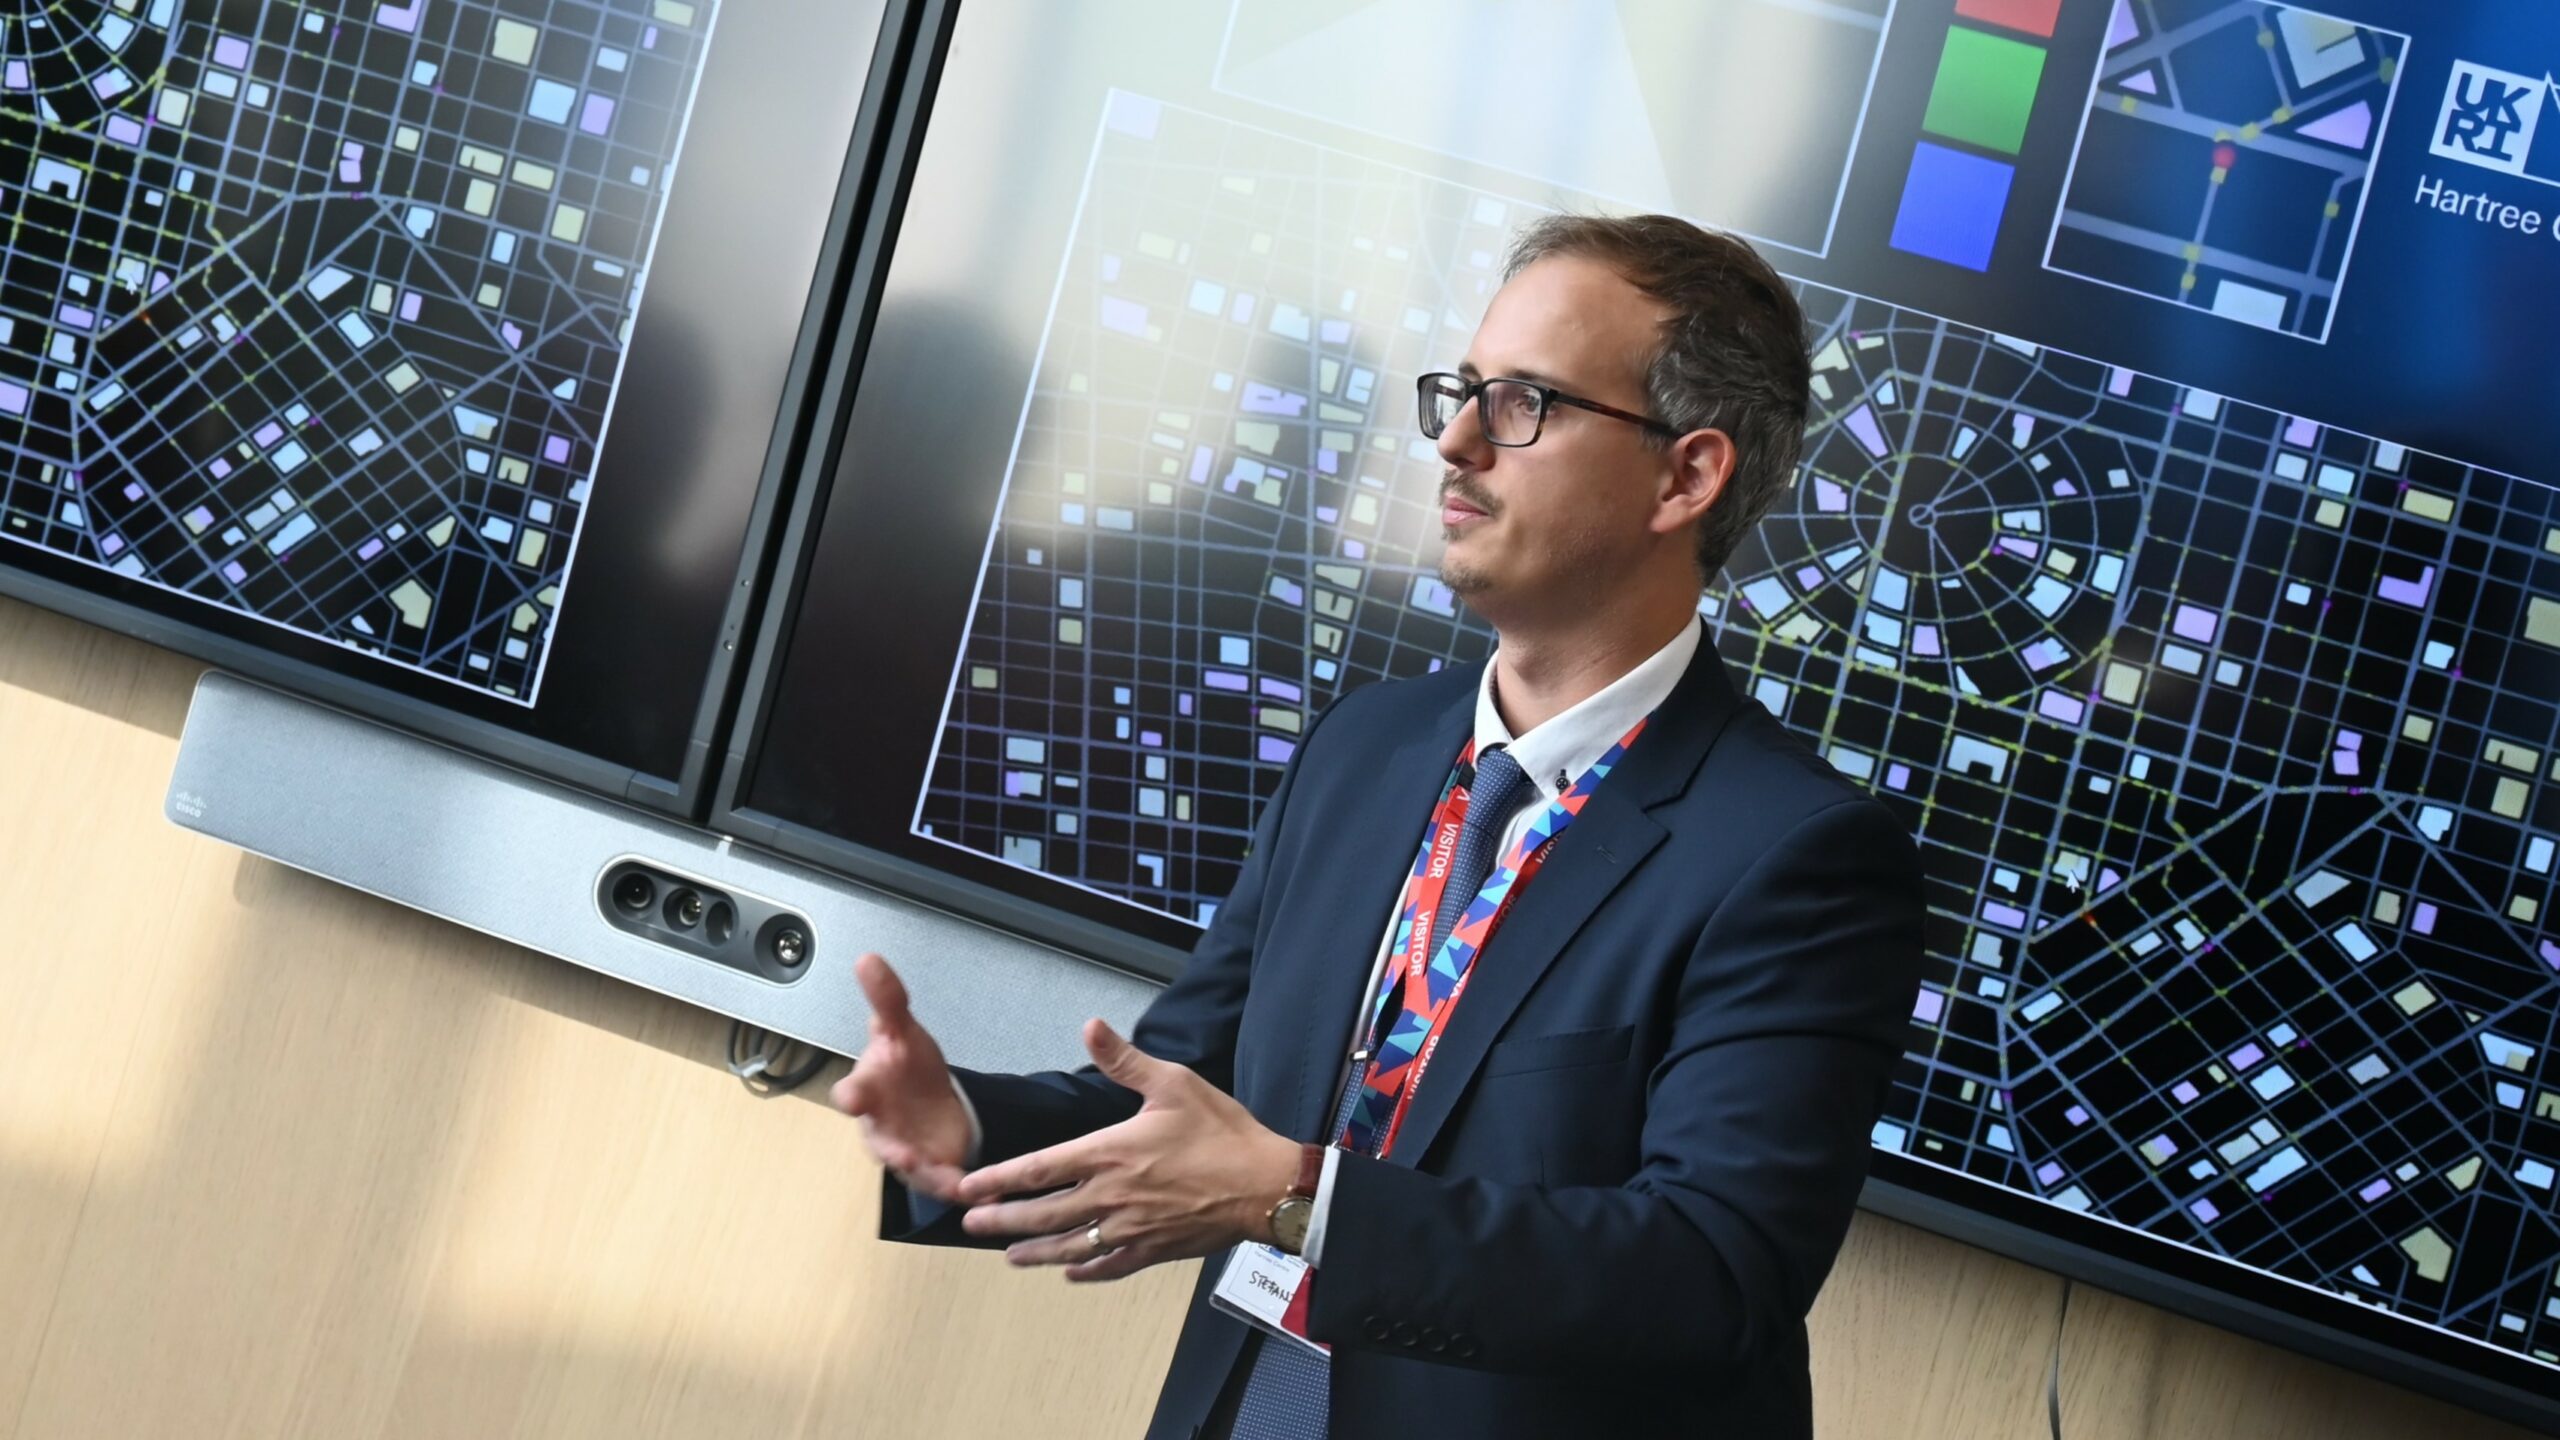 A man speaking in front of a quantum computing visualisation on a screen.